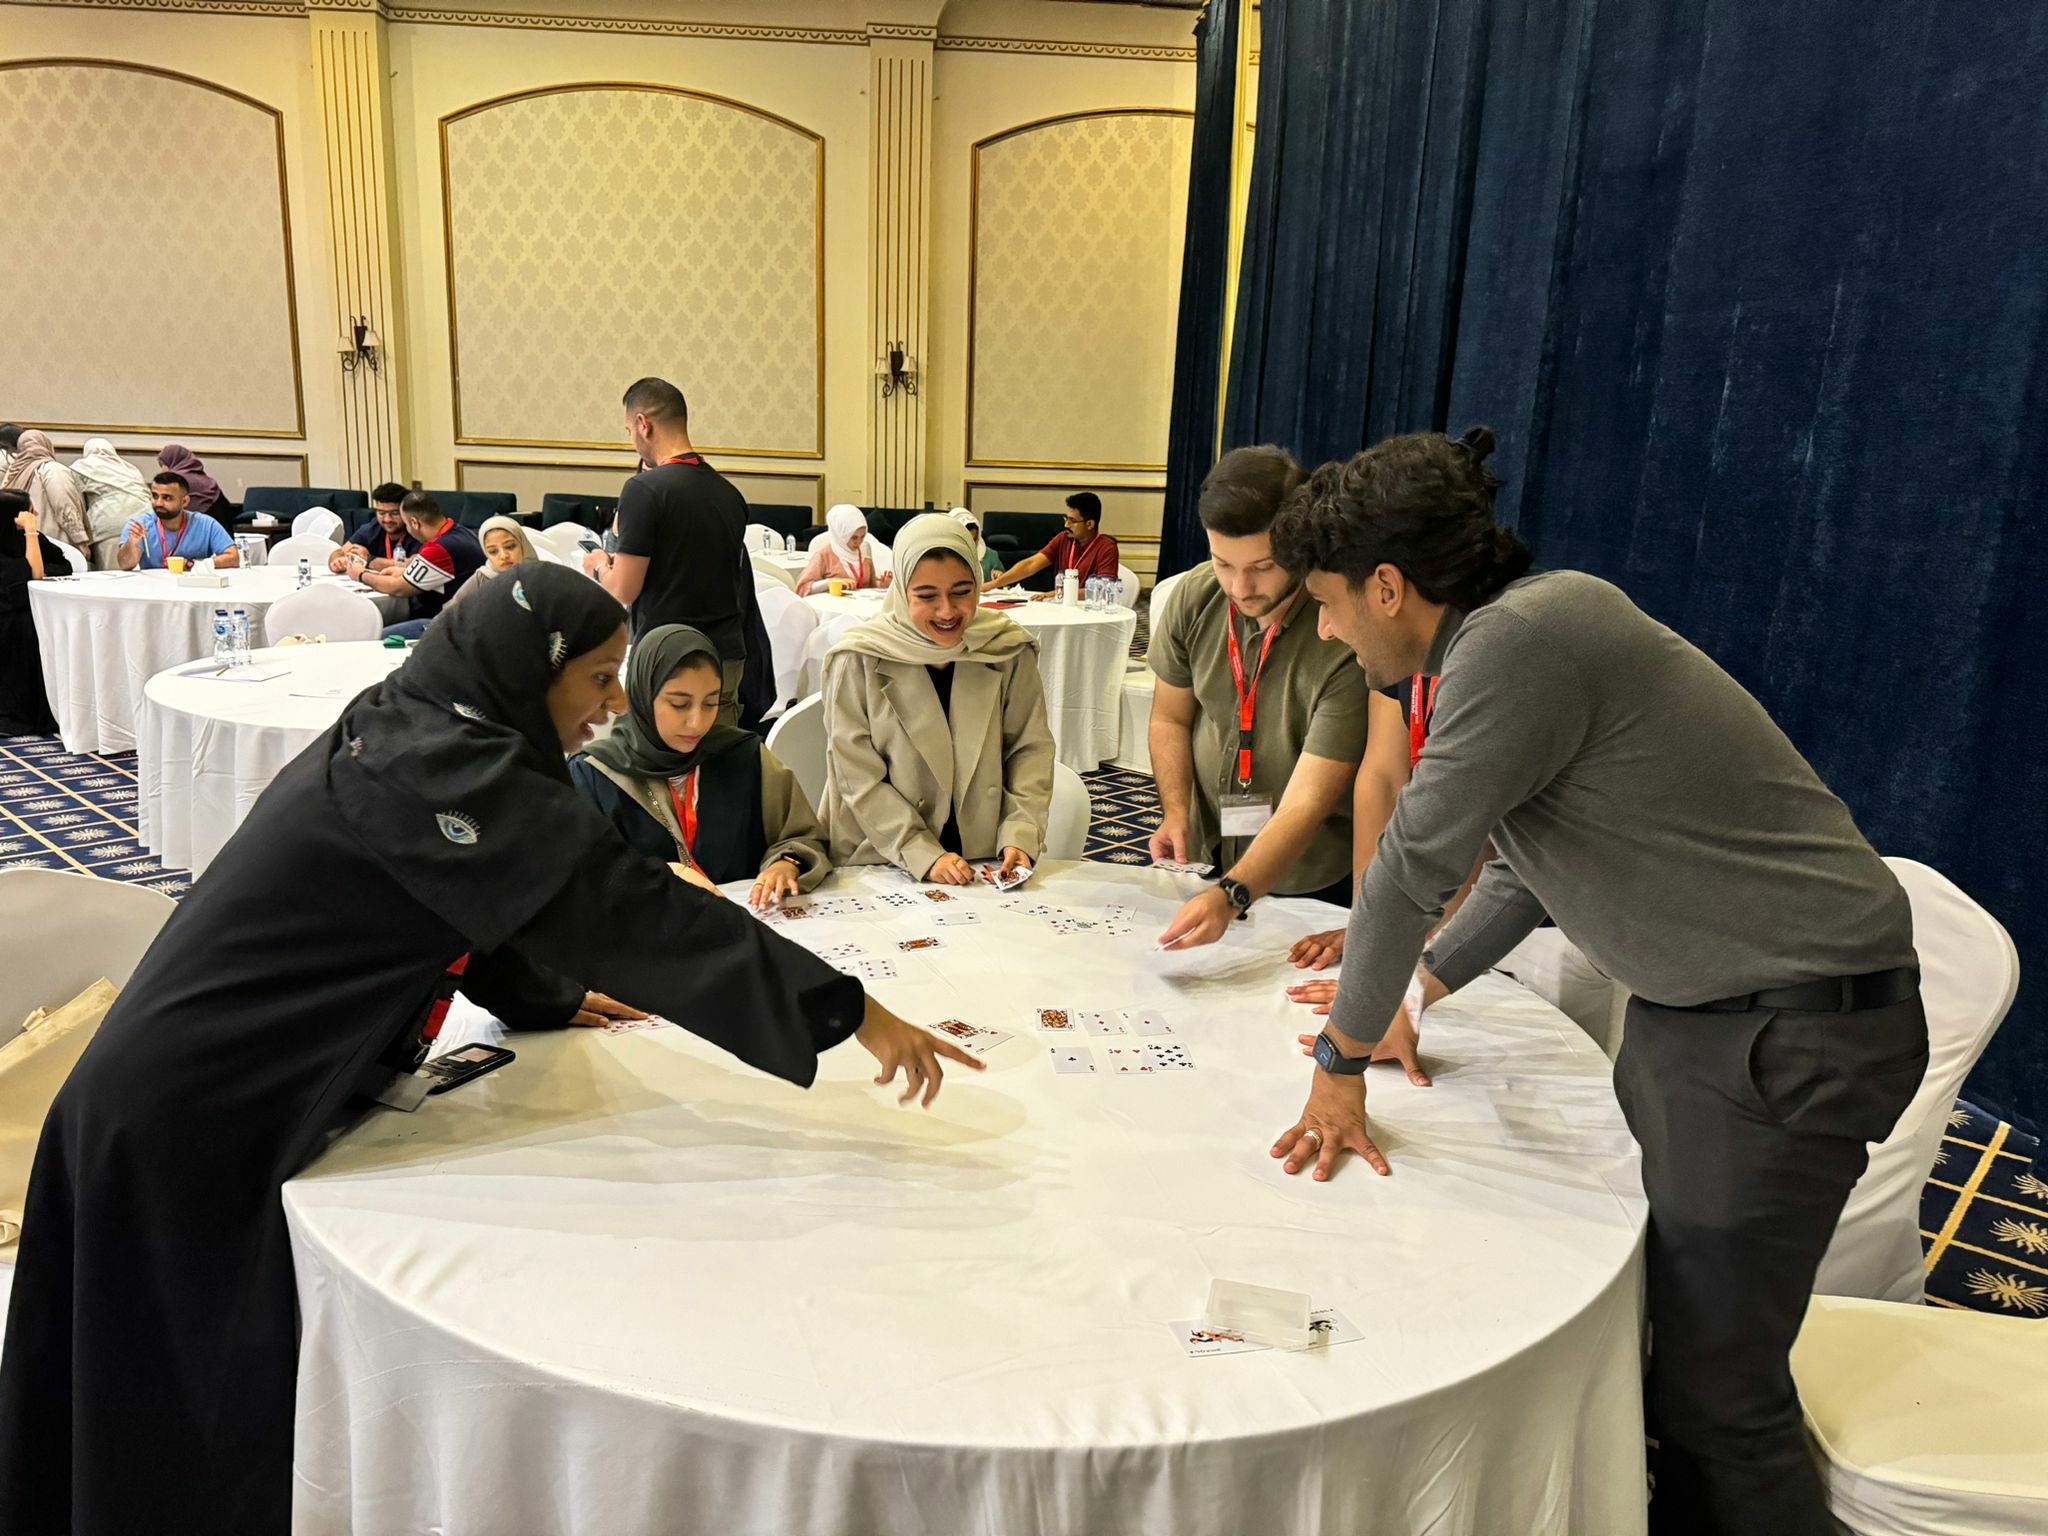 People around a table engaged in an activity with cards, wearing lanyards, in a decorated conference room.